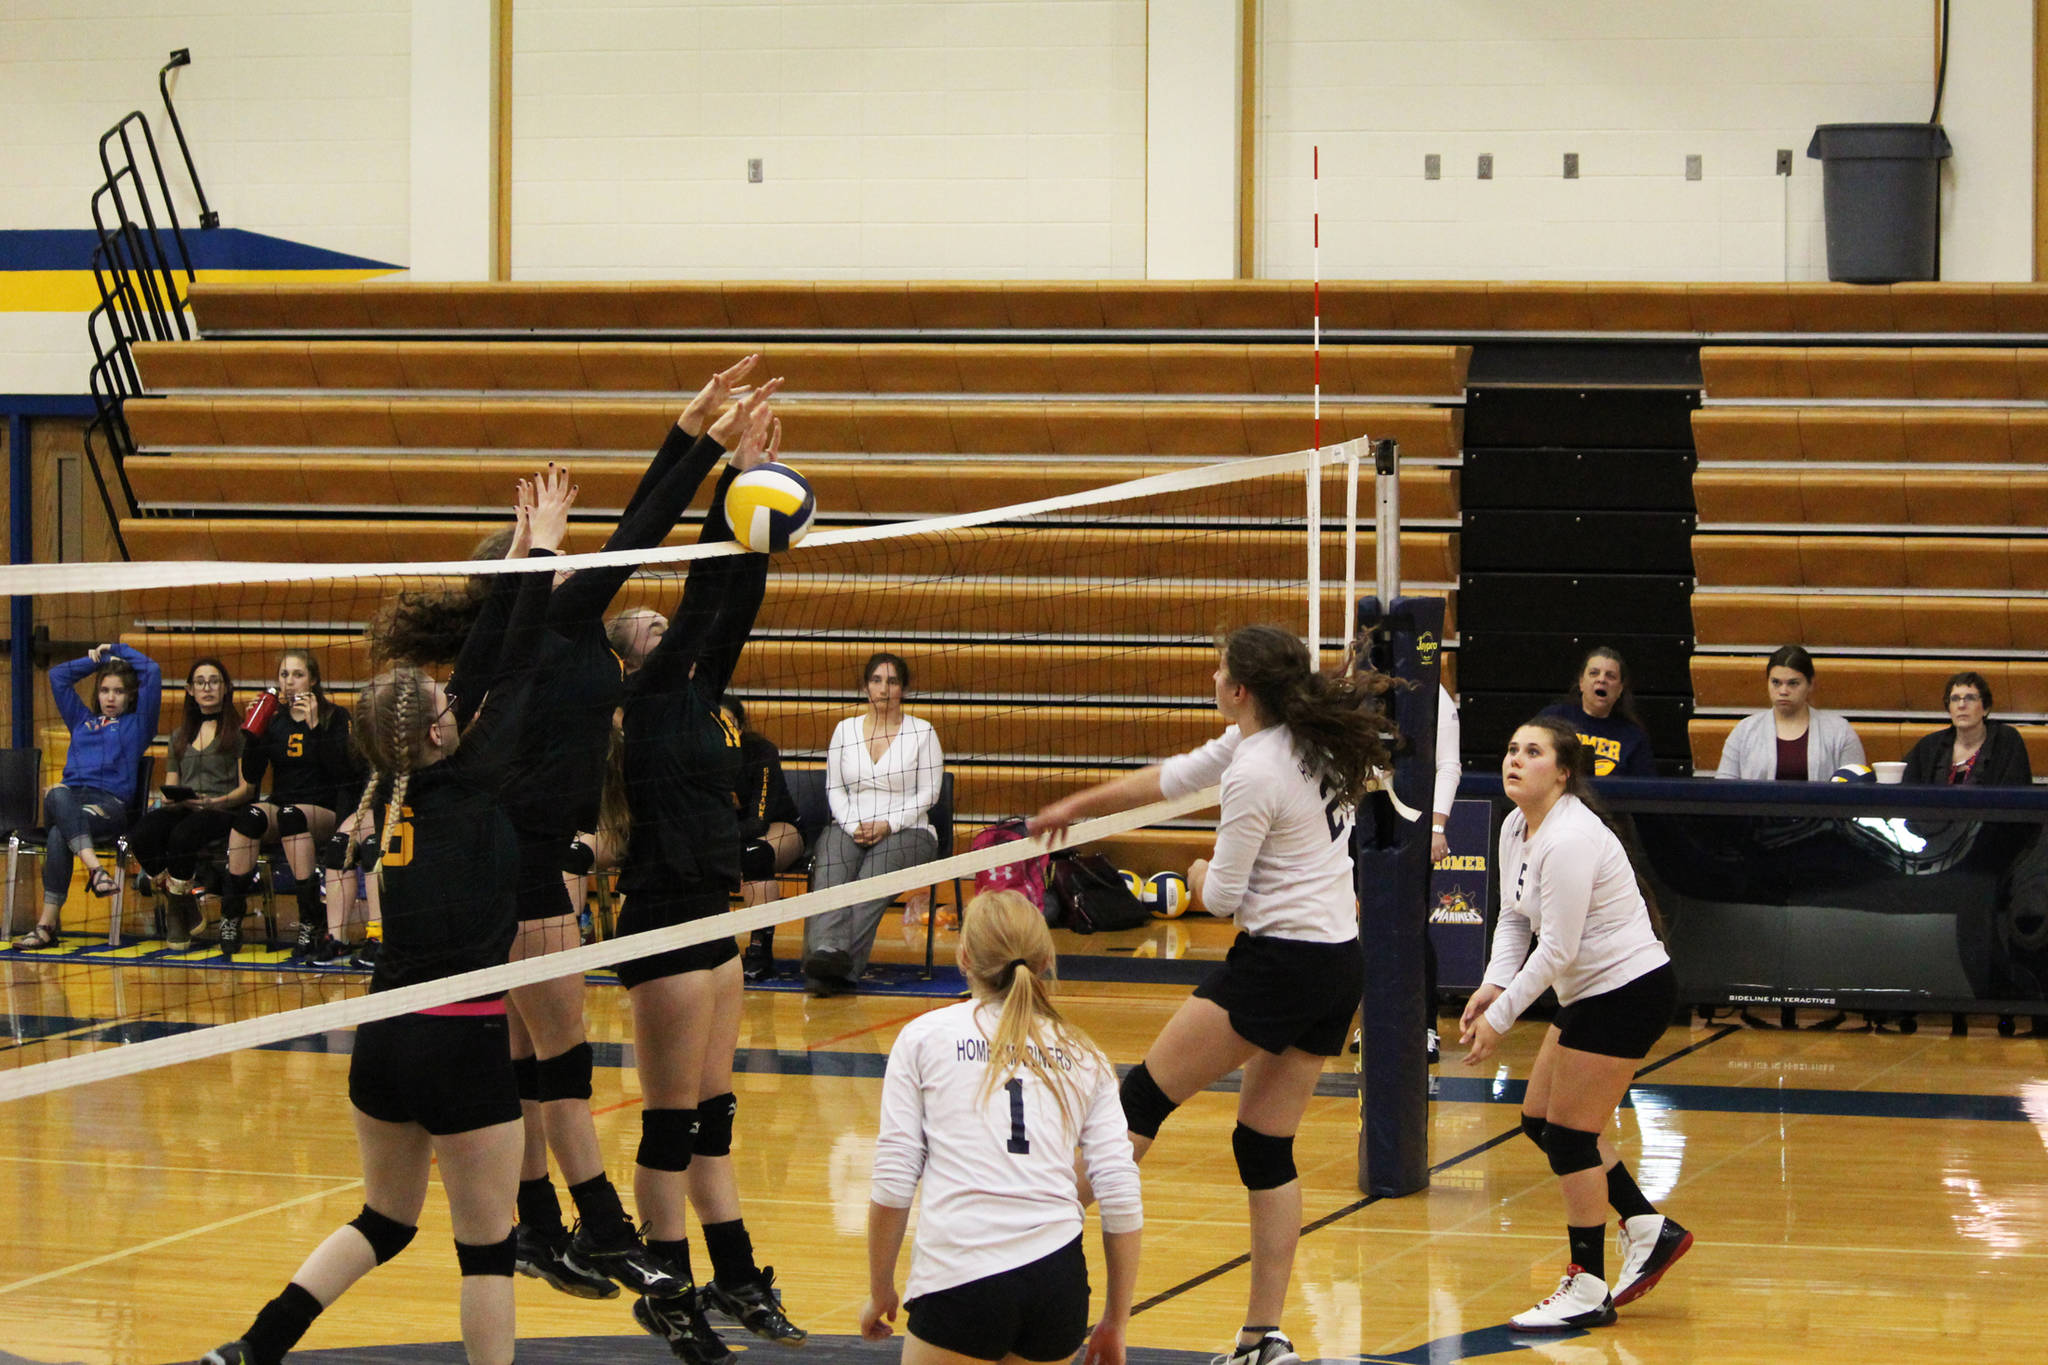 A horde of Seward High School varsity volleyball players block a hit from sophomore Marina Carroll during the Homer Mariners’ home game against the Seahawks on Friday, Sept. 29, 2017 at the Alice Witte Gymnasium in Homer, Alaska. The Mariners fell to the Seahawks, winning one set to the Seahawks’ three sets. (Photo by Megan Pacer/Homer News)